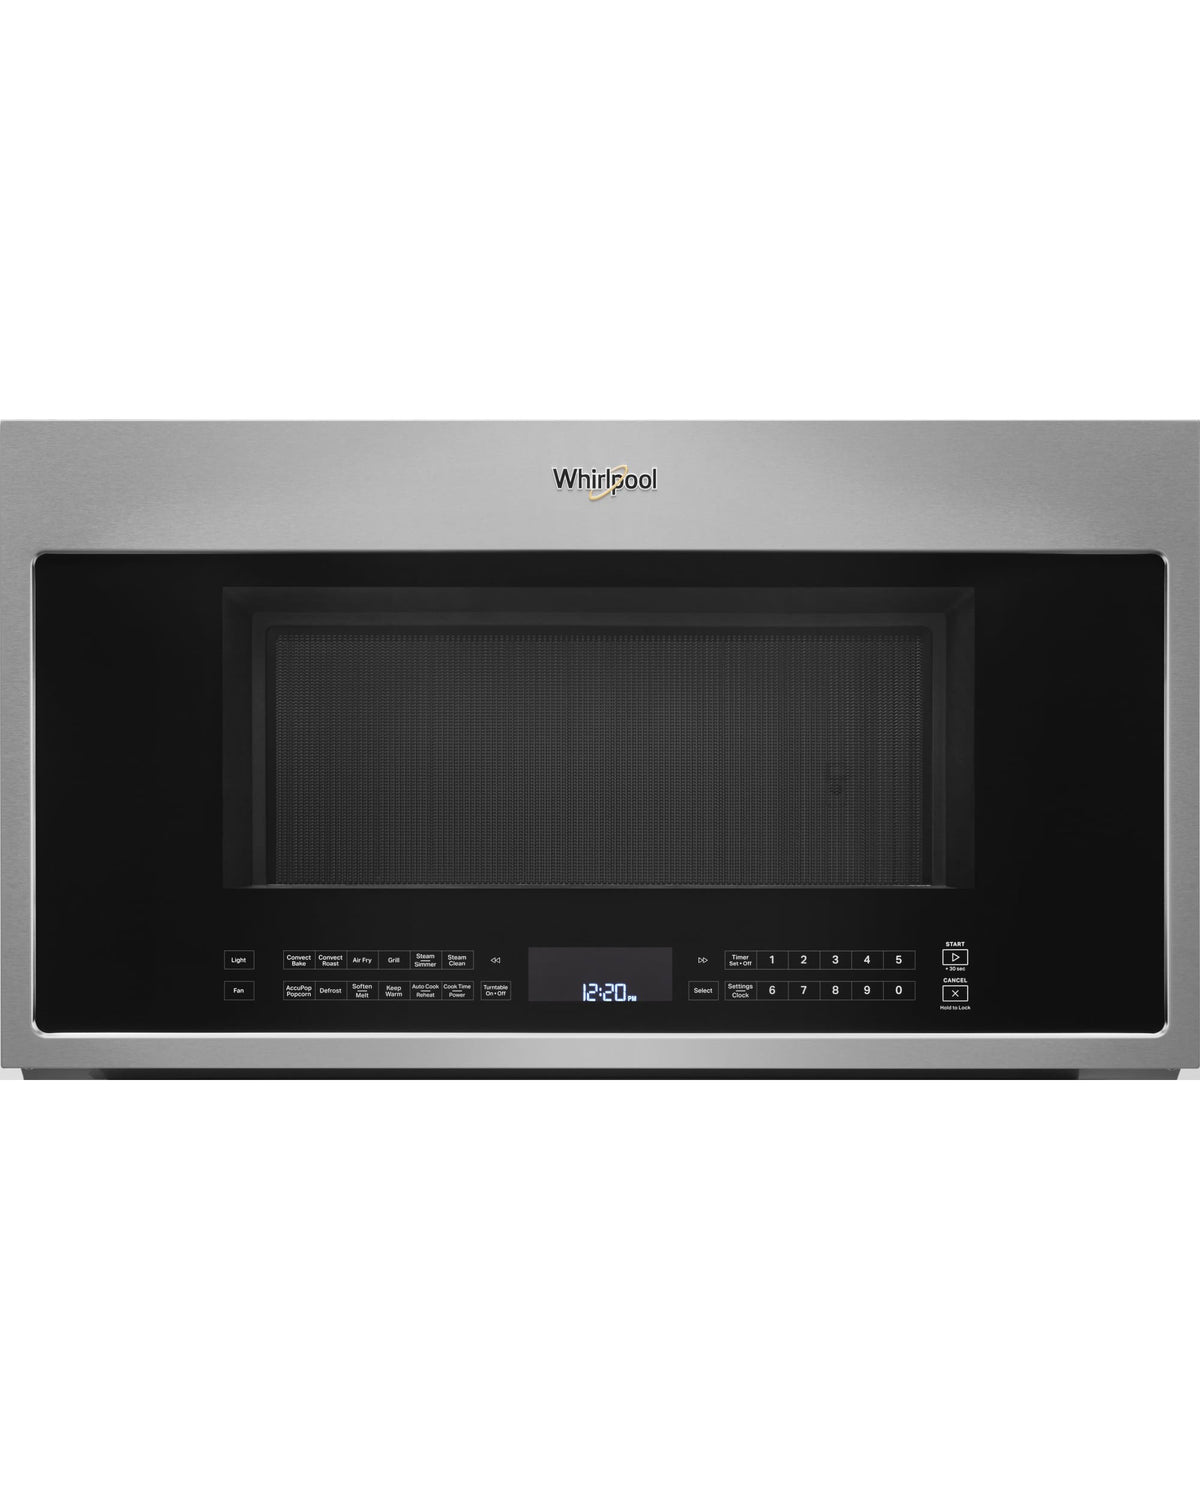 WHIRLPOOL WMH78519LZ 1.9 Cu. Ft. Microwave with Air Fry Mode